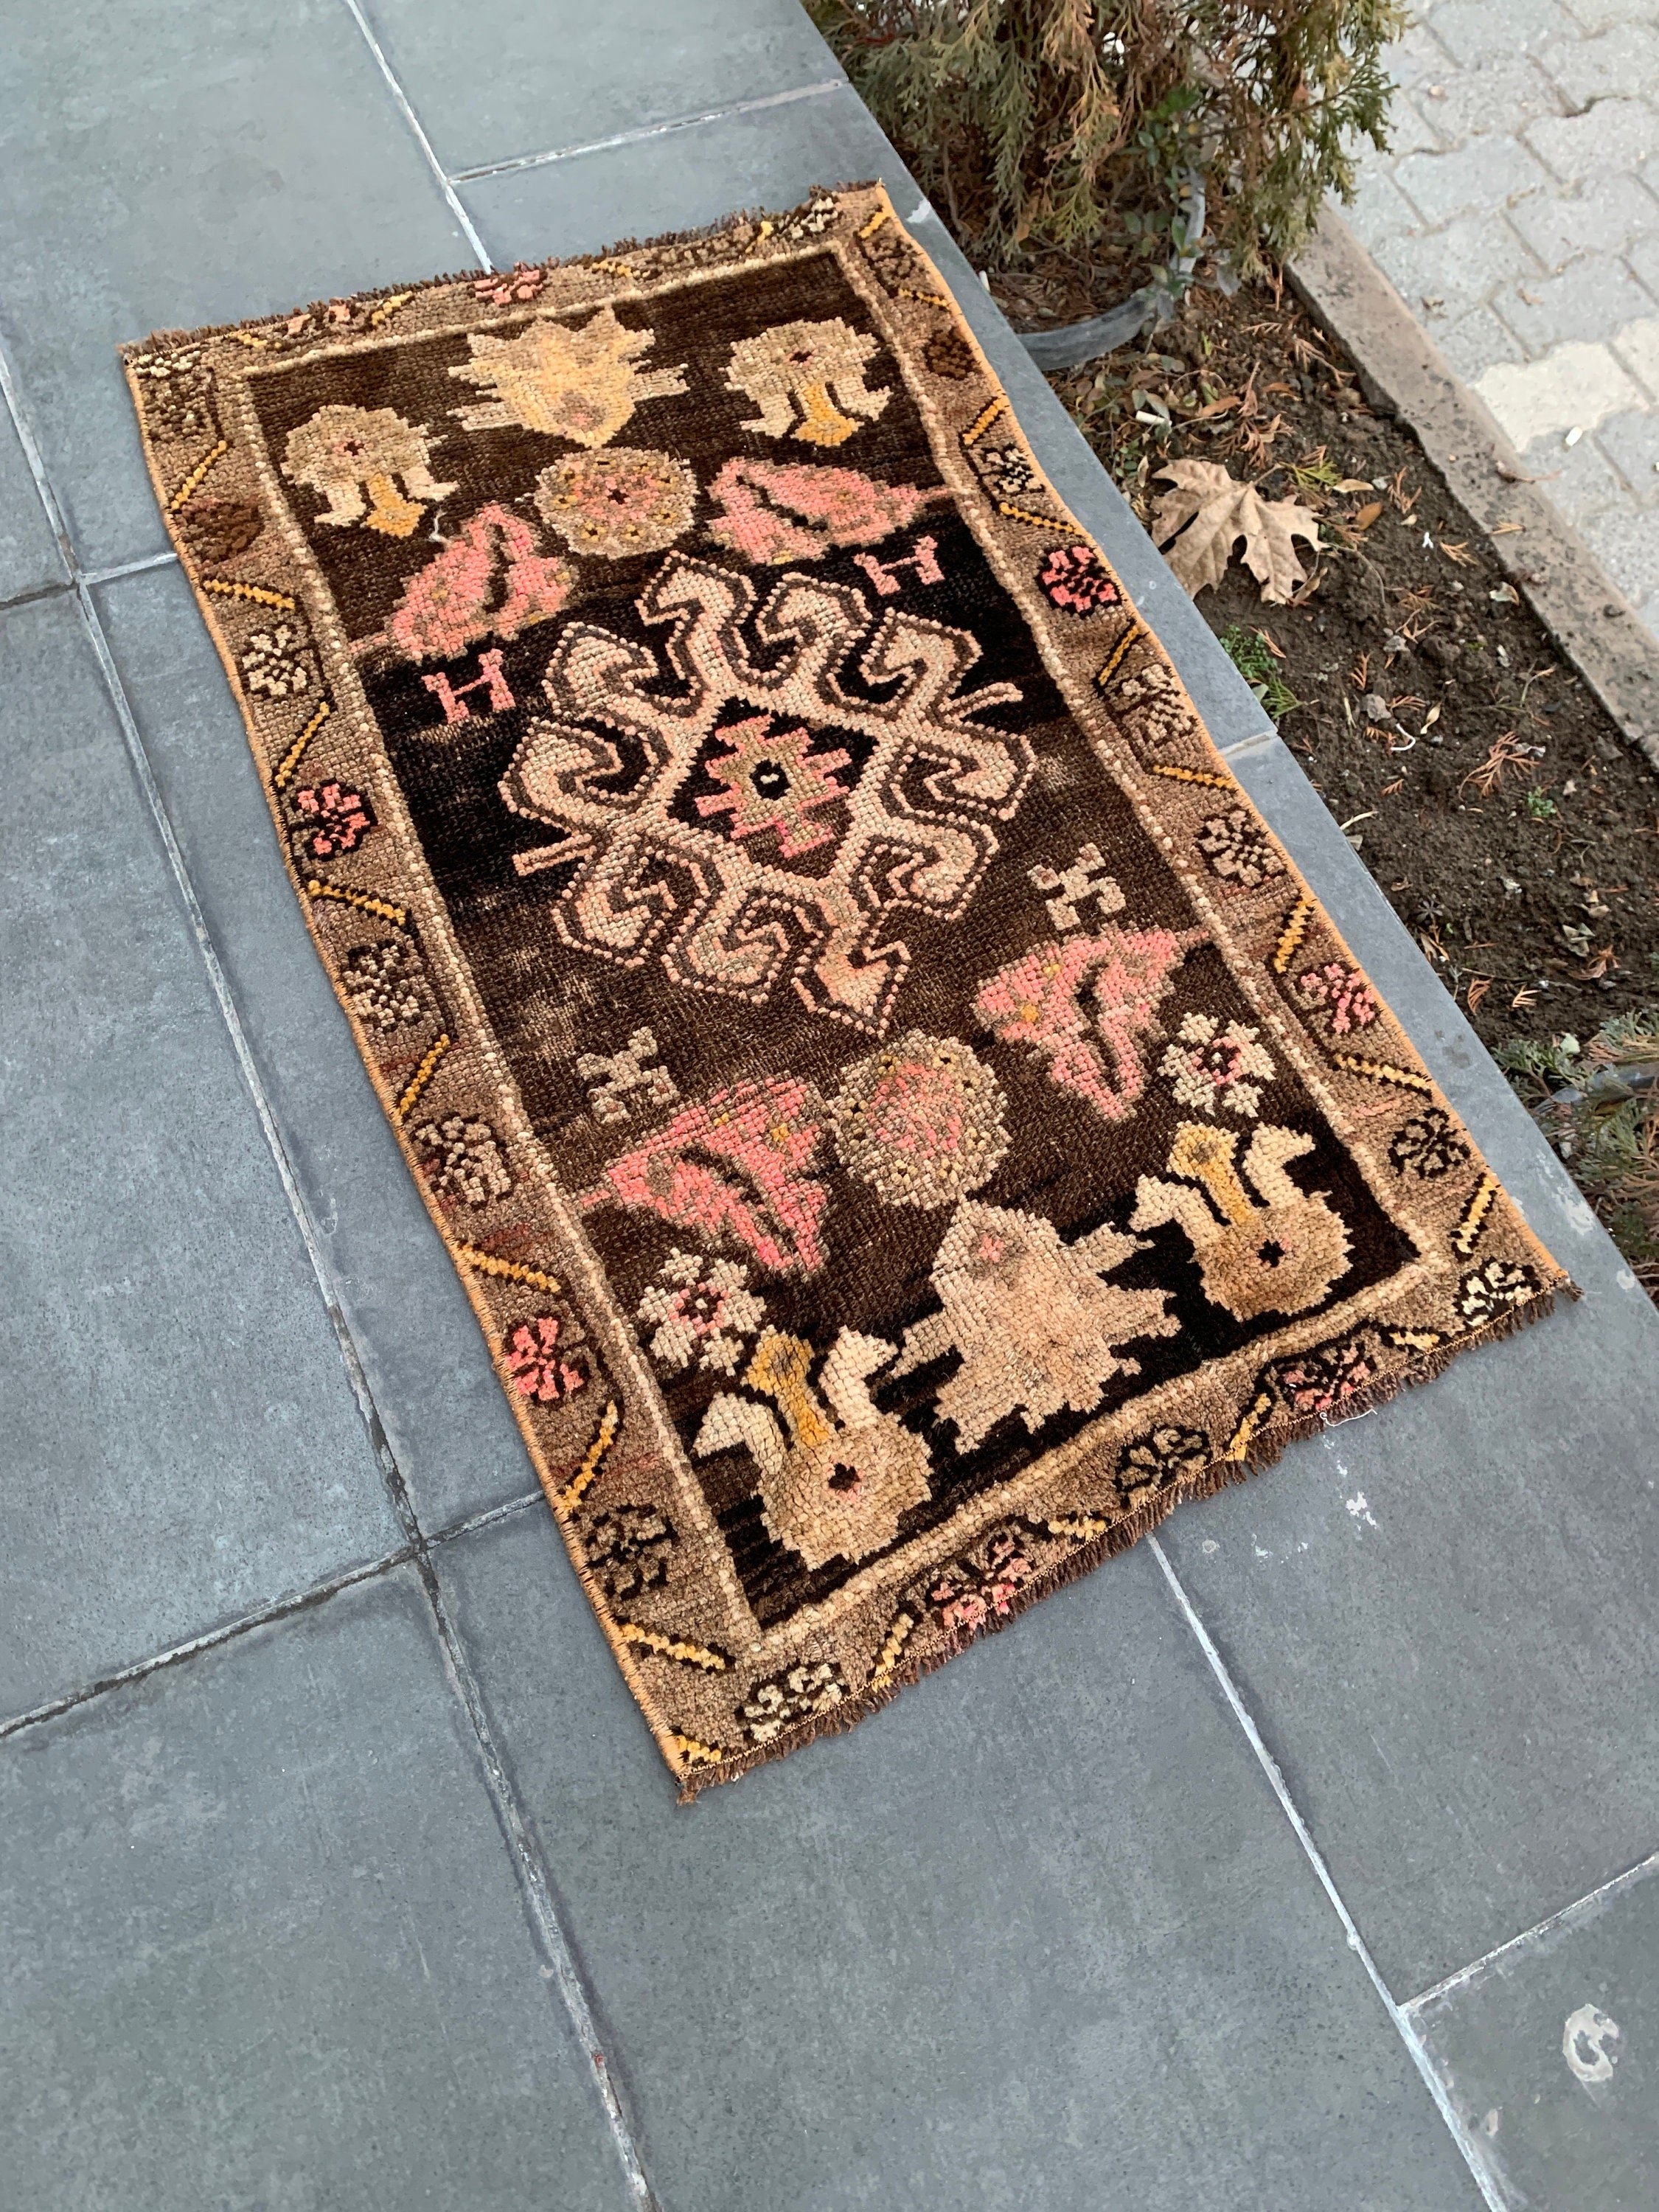 Old Rug, Kitchen Rugs, Vintage Rug, Turkish Rug, Wall Hanging Rug, Oriental Rug, Beige  1.7x2.9 ft Small Rugs, Home Decor Rugs